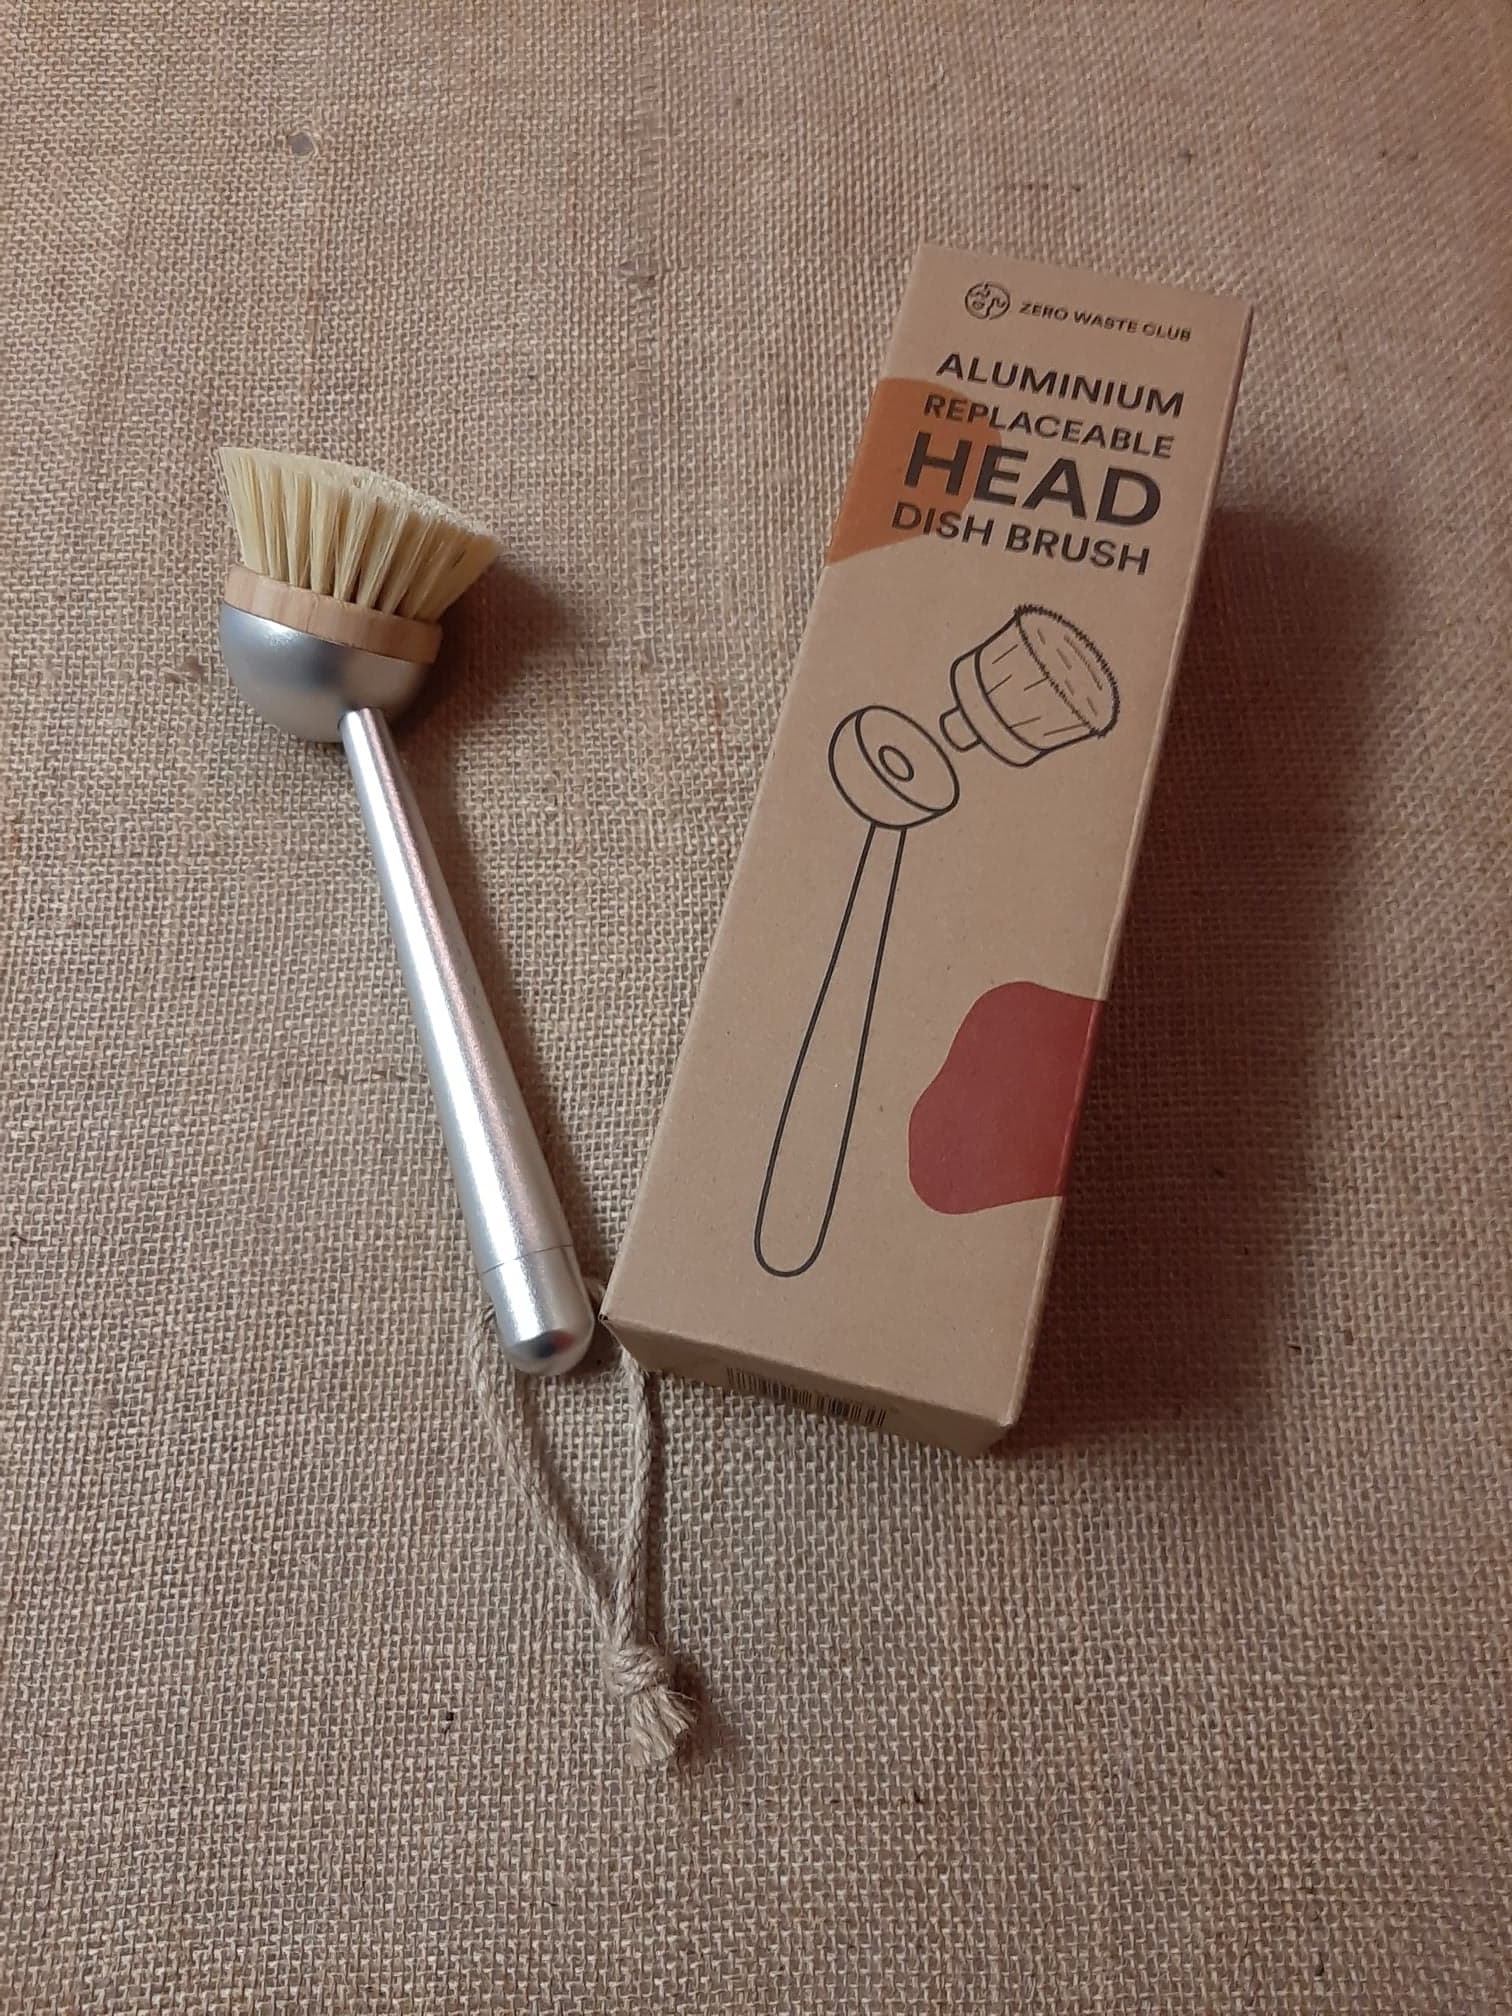 Dish Brush with replaceable head